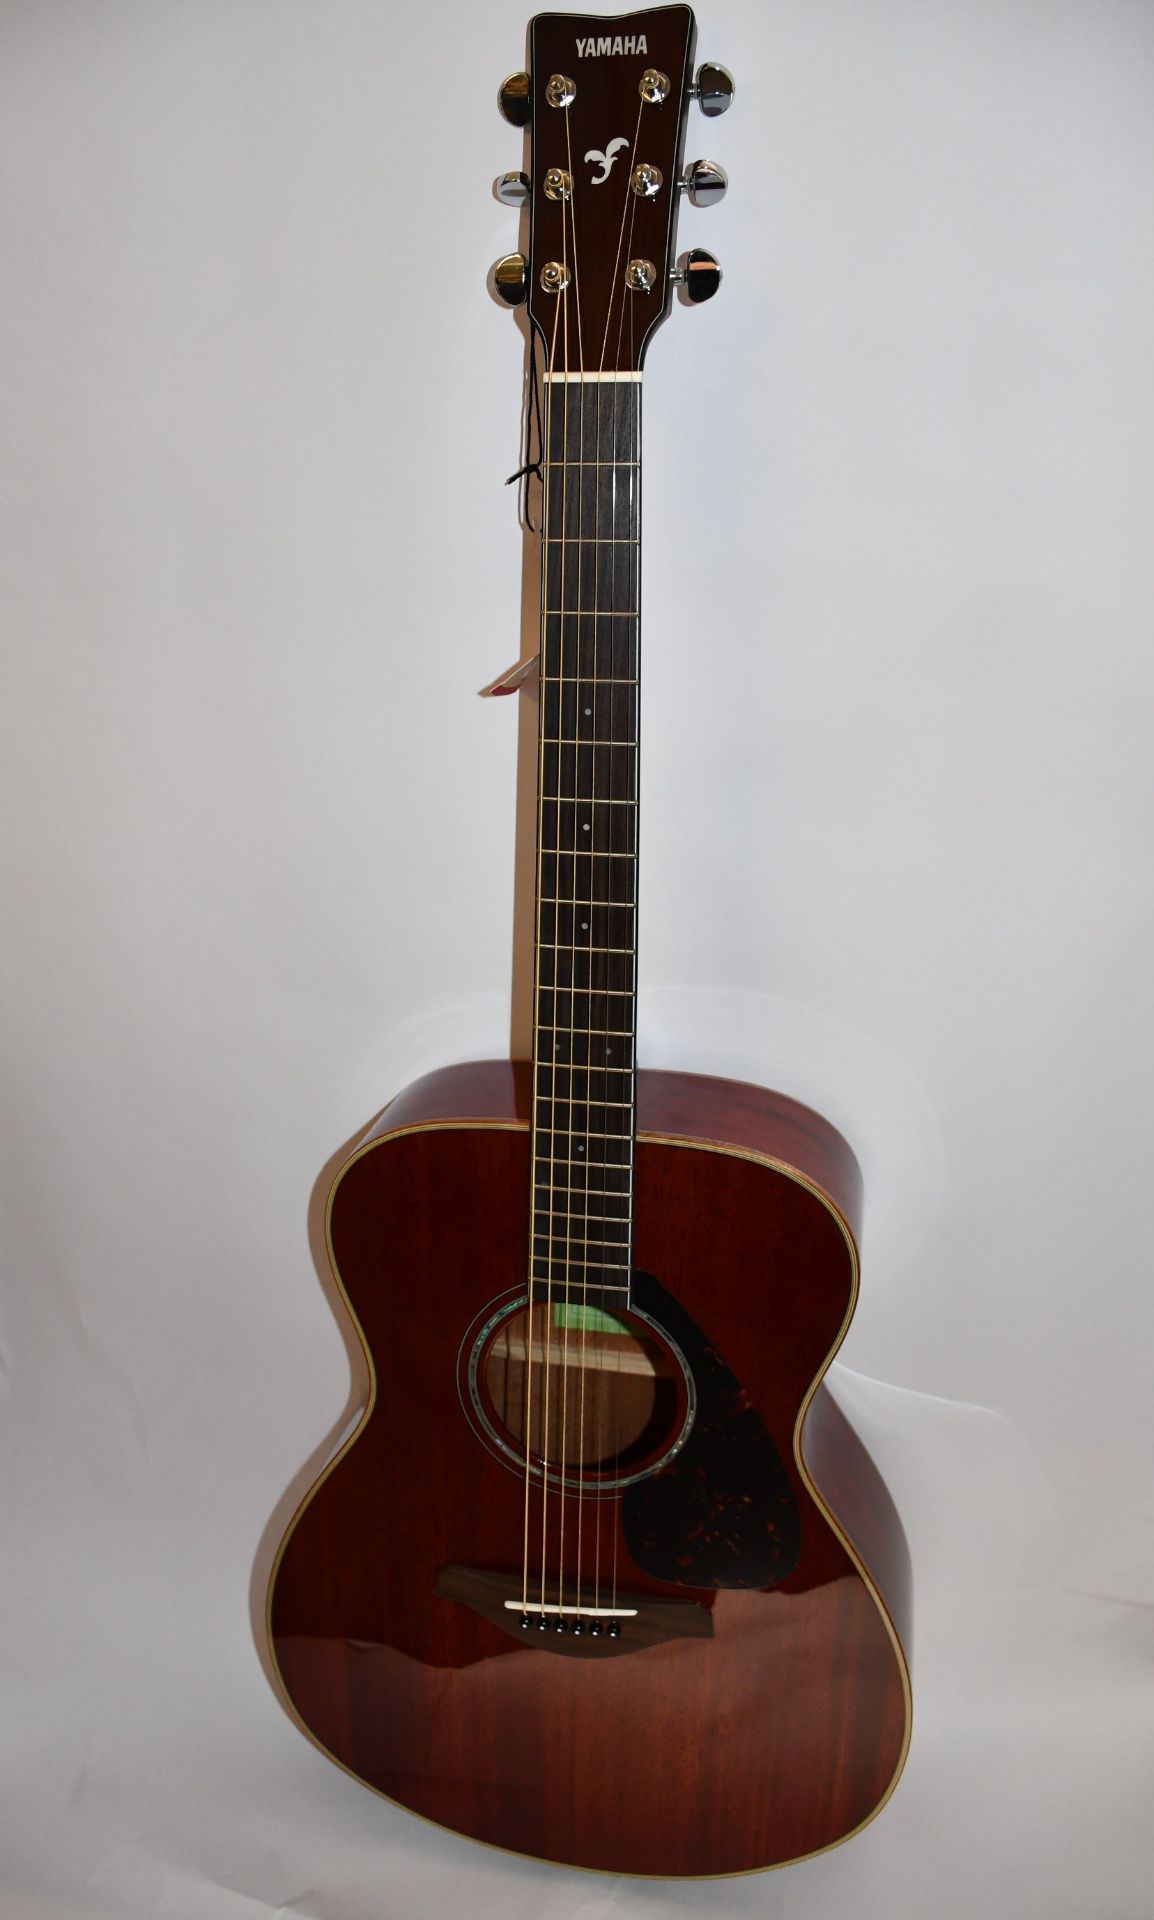 One boxed Yamaha FS 850 acoustic guitar.